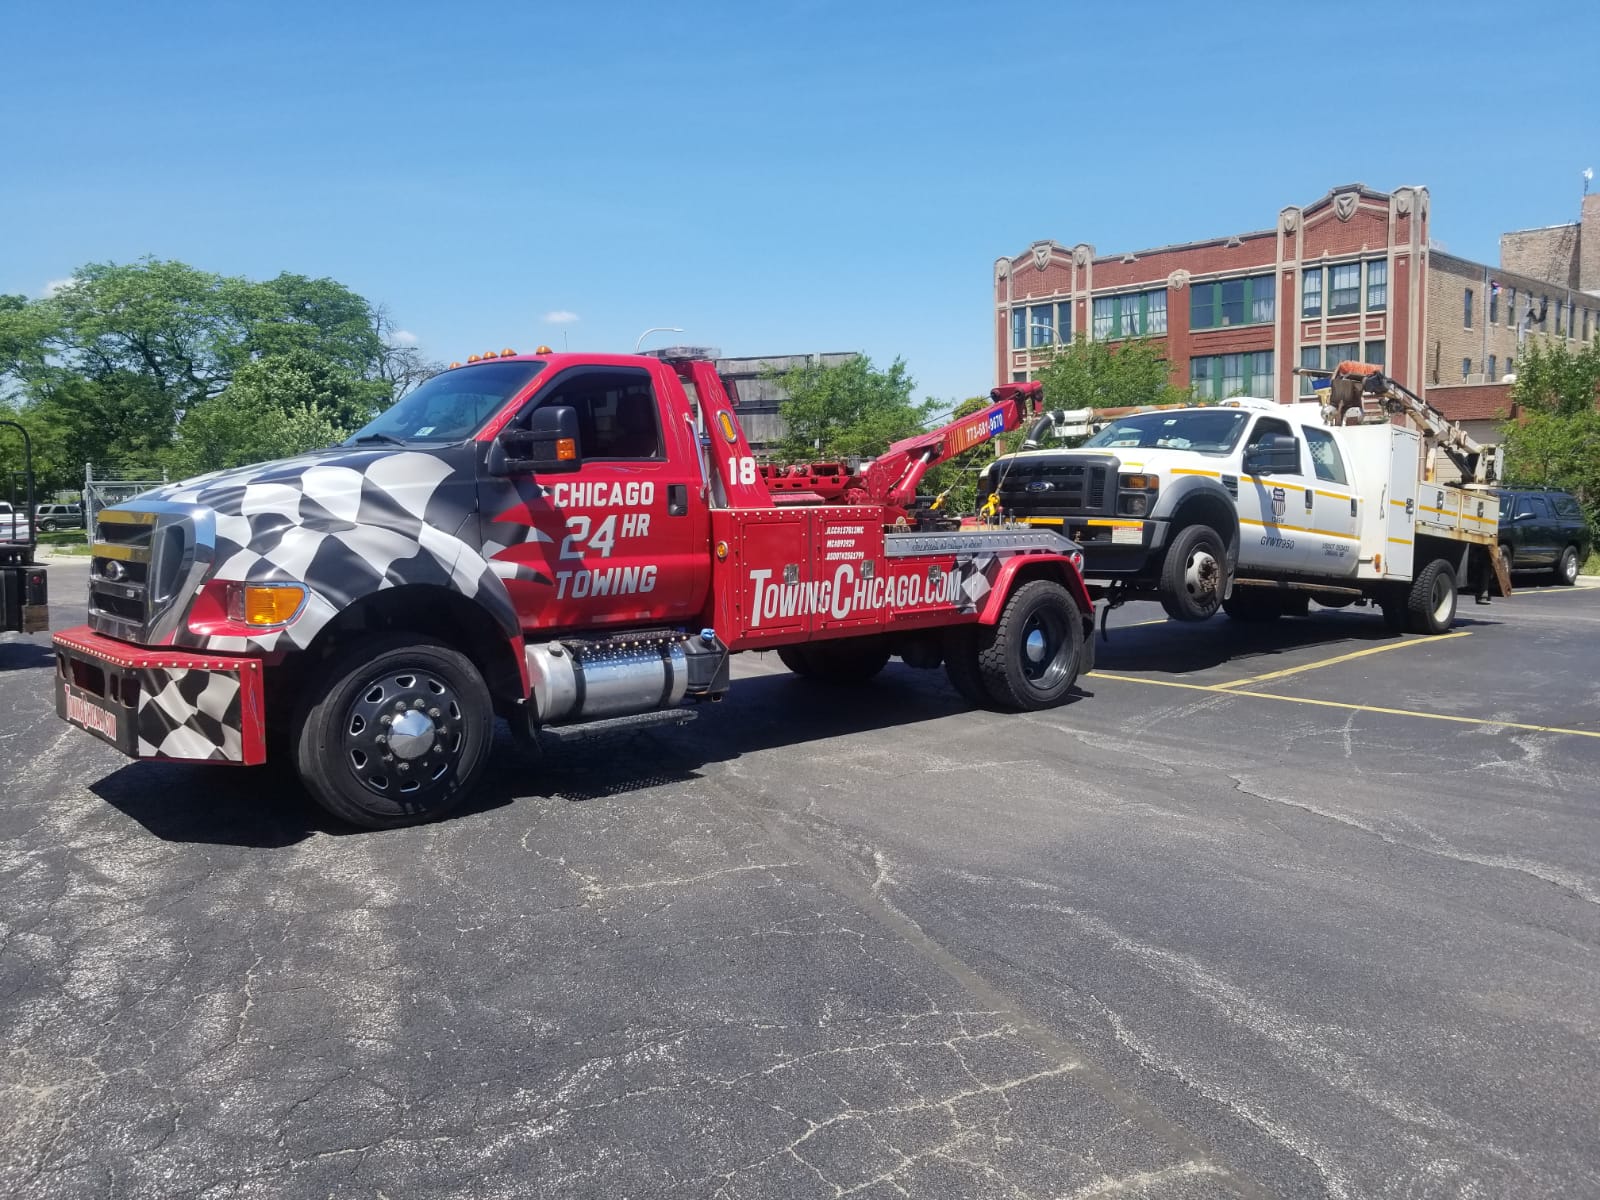 How To Deal With Towing Companies